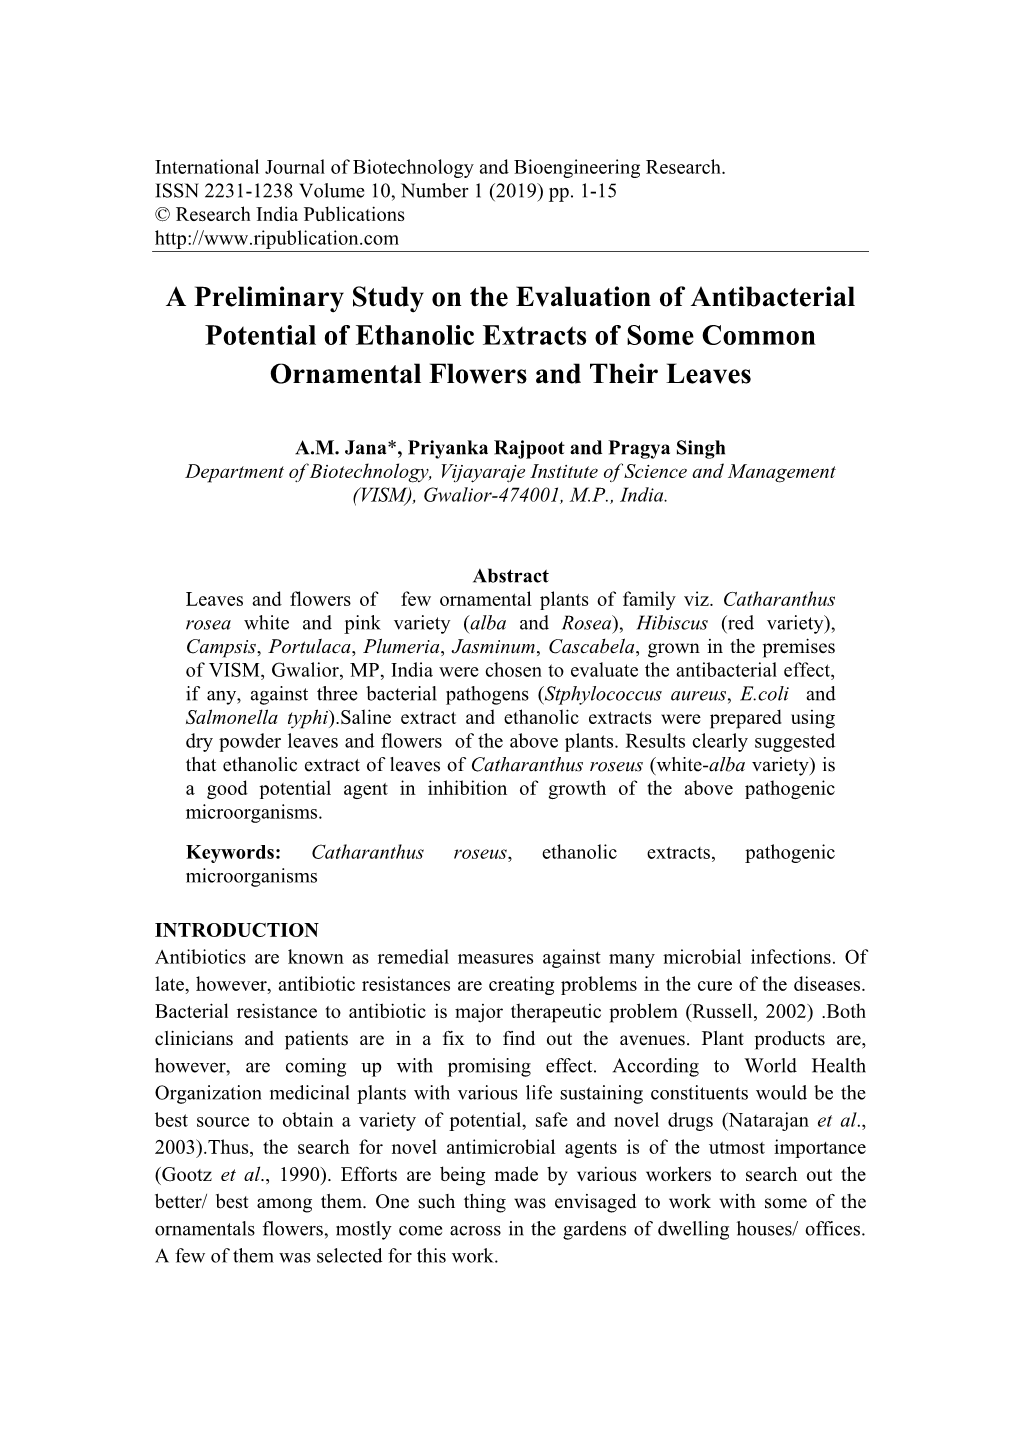 A Preliminary Study on the Evaluation of Antibacterial Potential of Ethanolic Extracts of Some Common Ornamental Flowers and Their Leaves